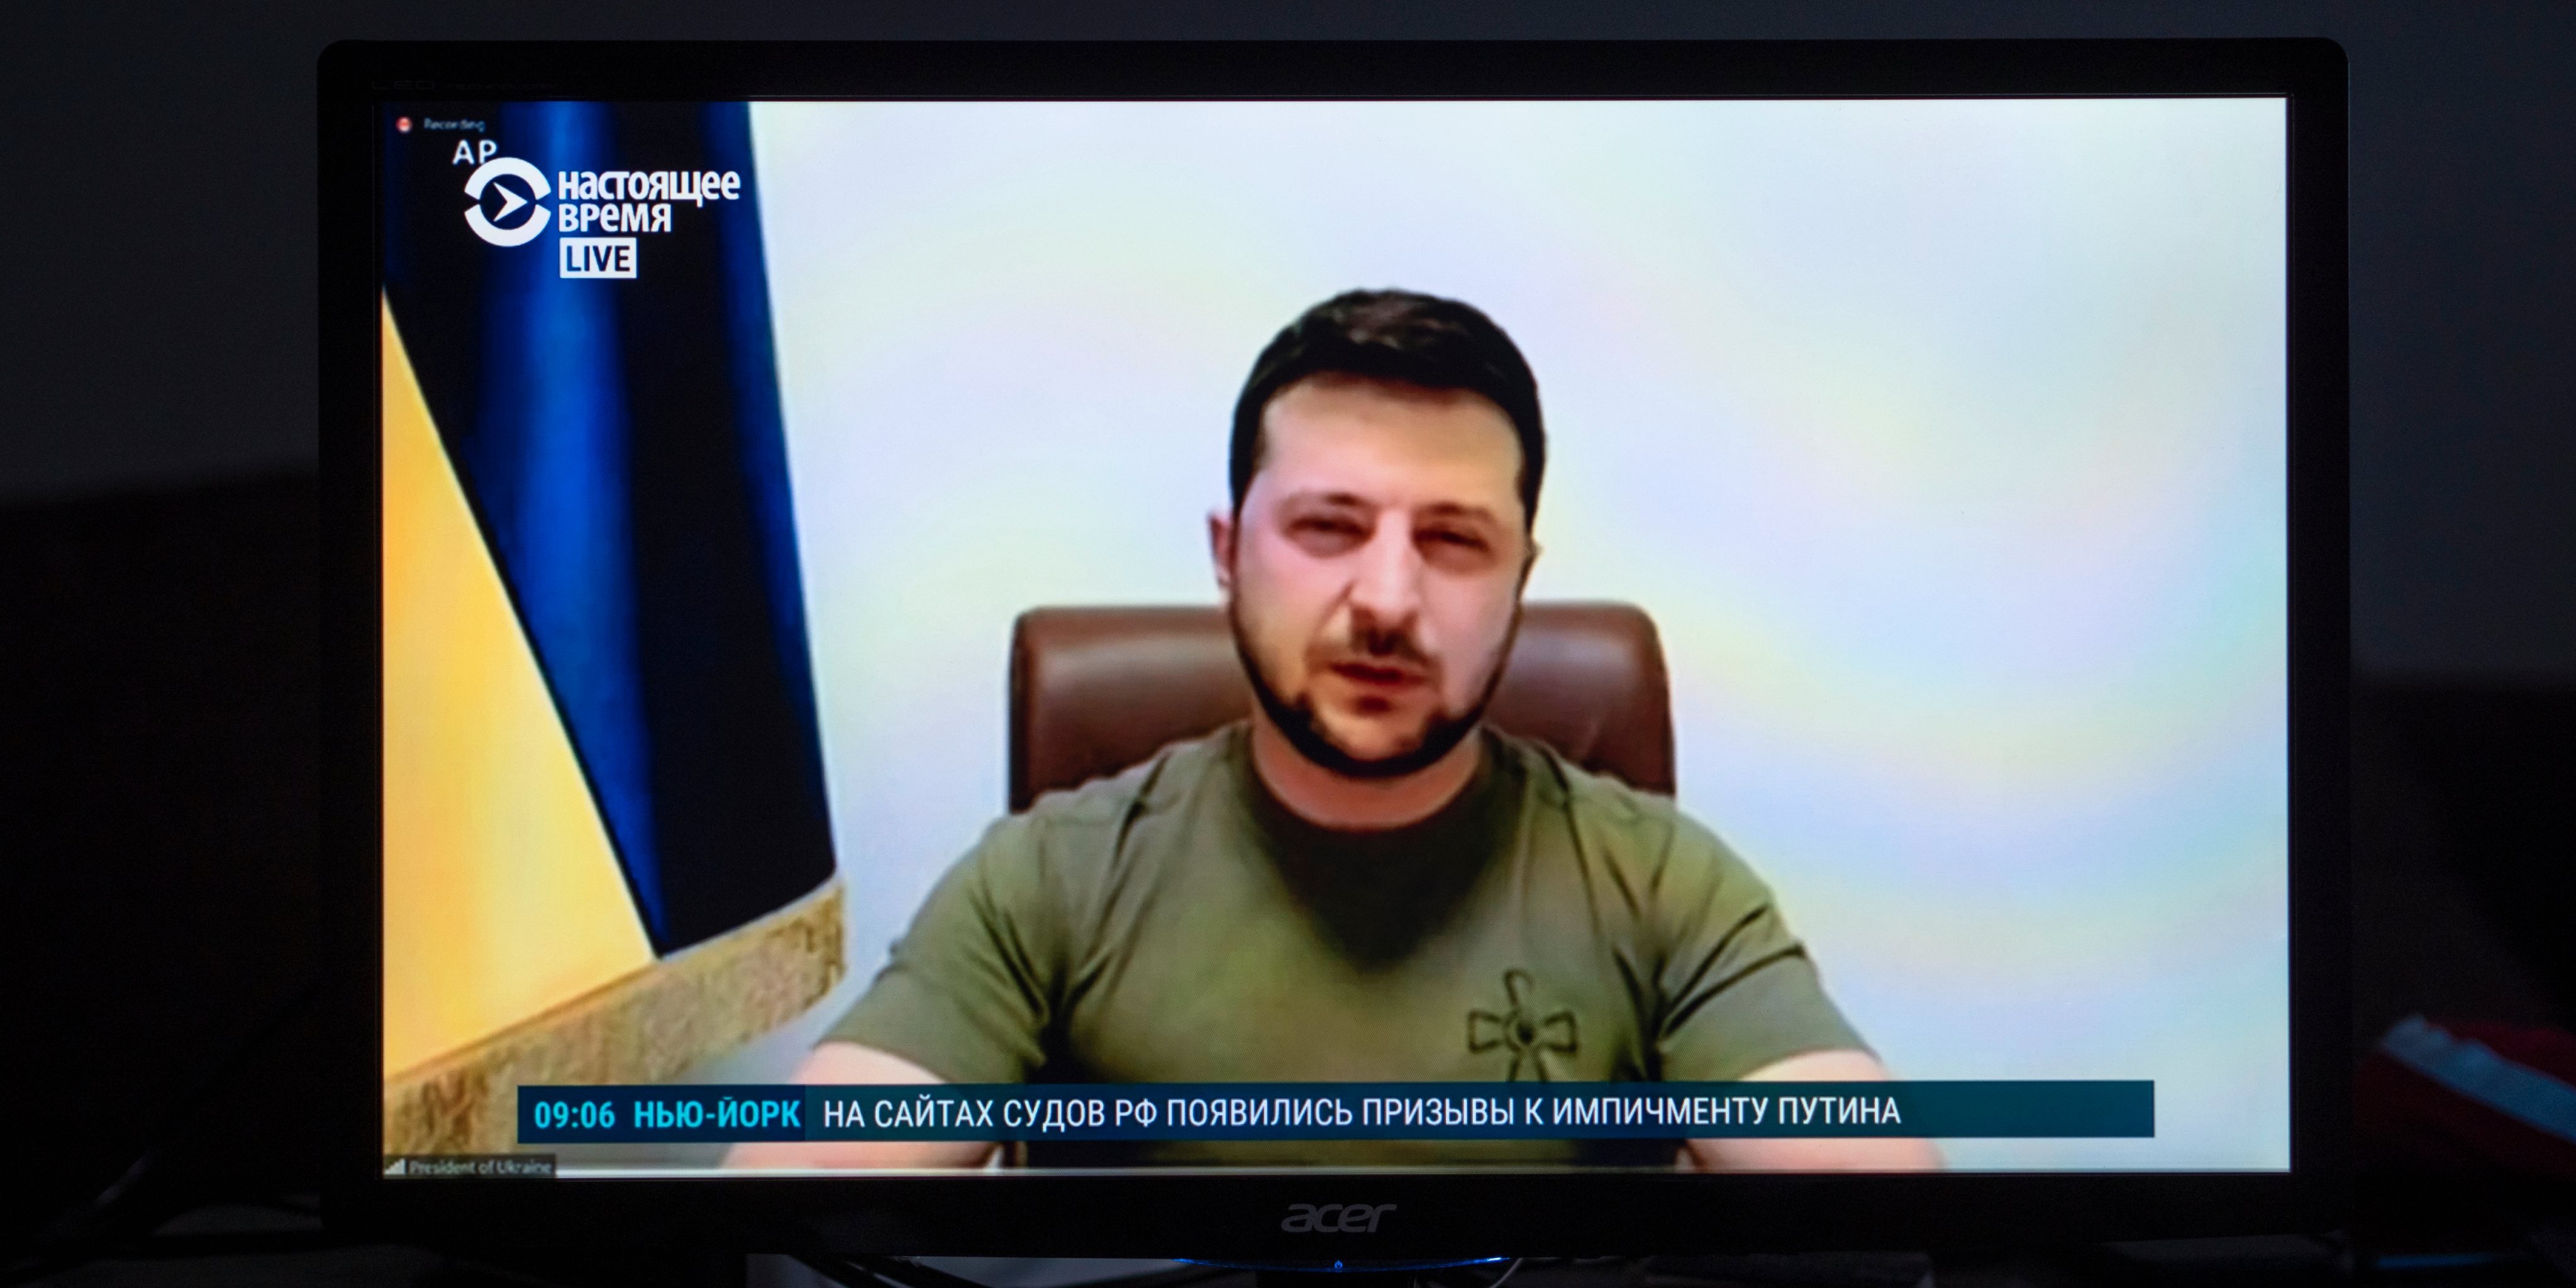 A screen grab of Volodymyr Zelensky delivering a speech to